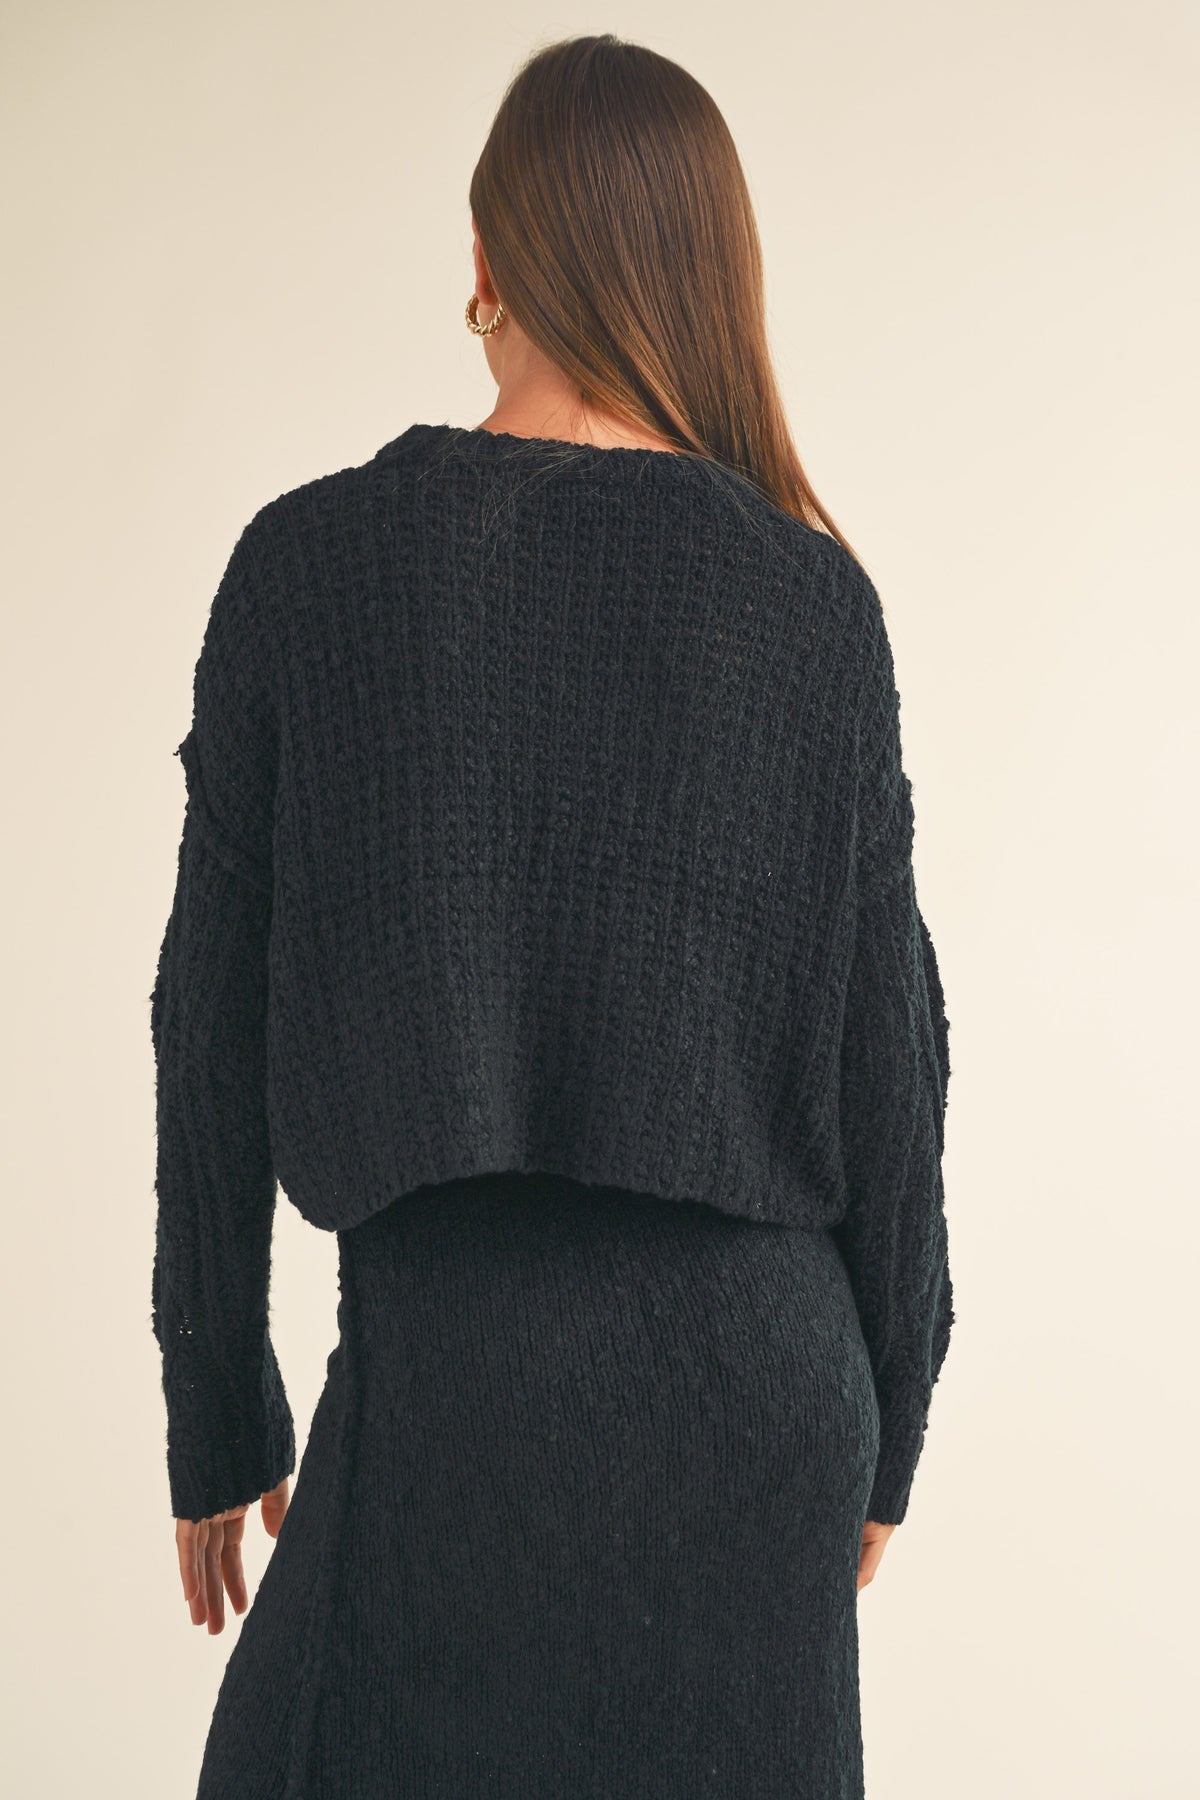 Miou Muse | Black Cable Knit Cropped Sweater | Sweetest Stitch